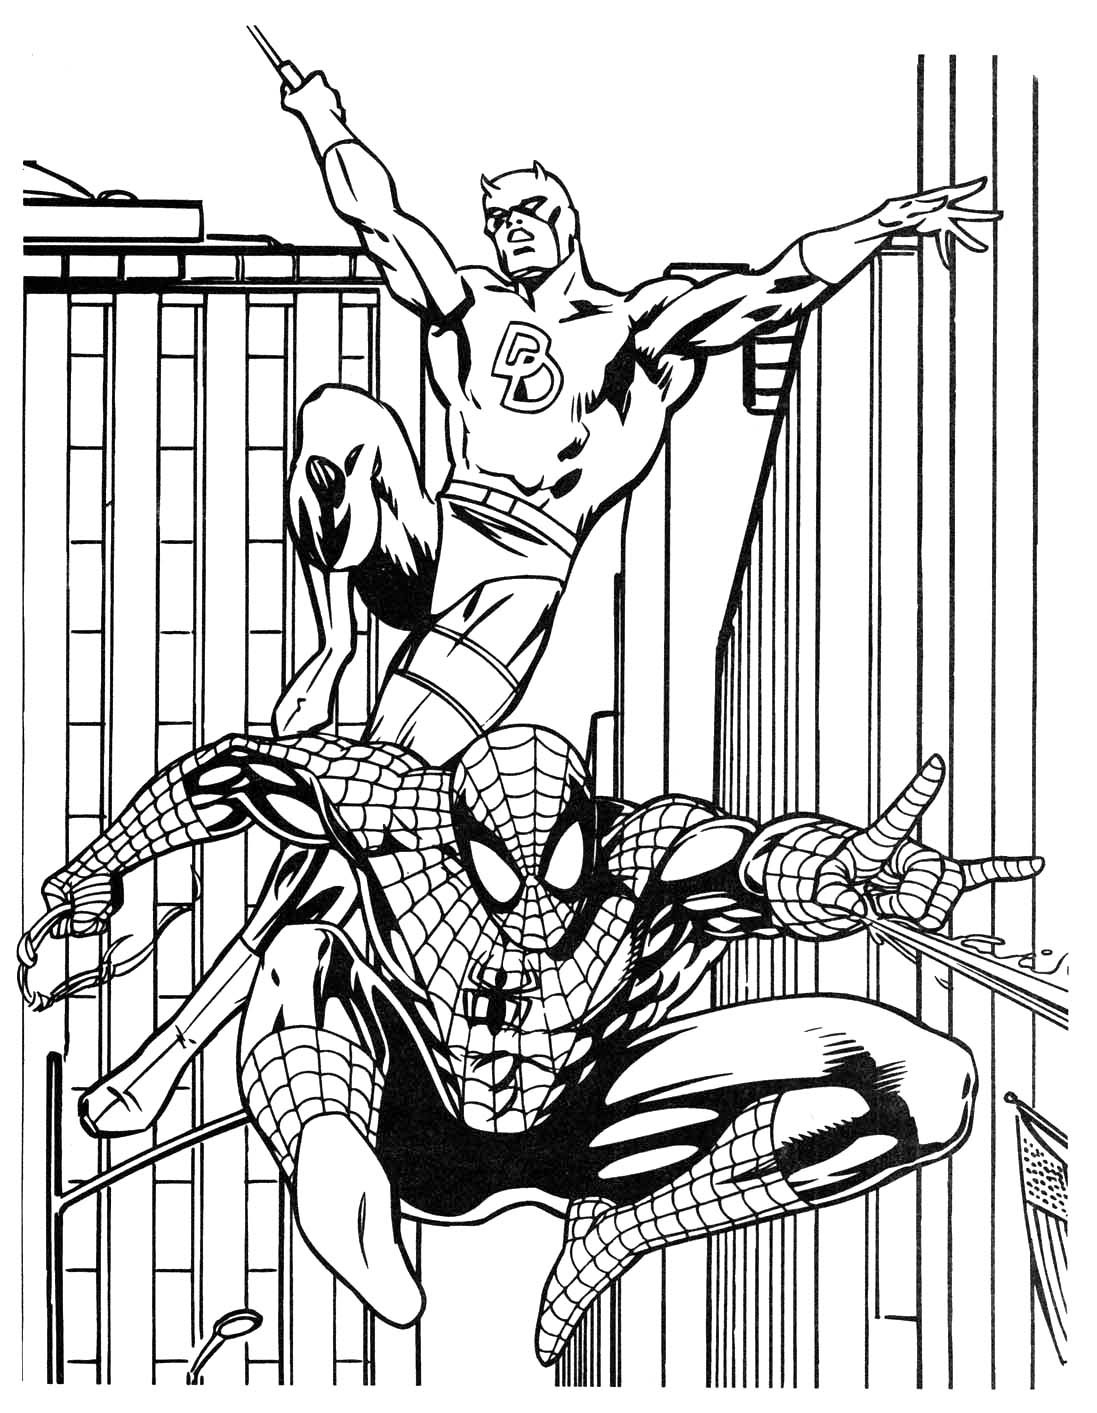 Marvel Superhero Coloring Pages
 Coloring book Marvel Super heroes